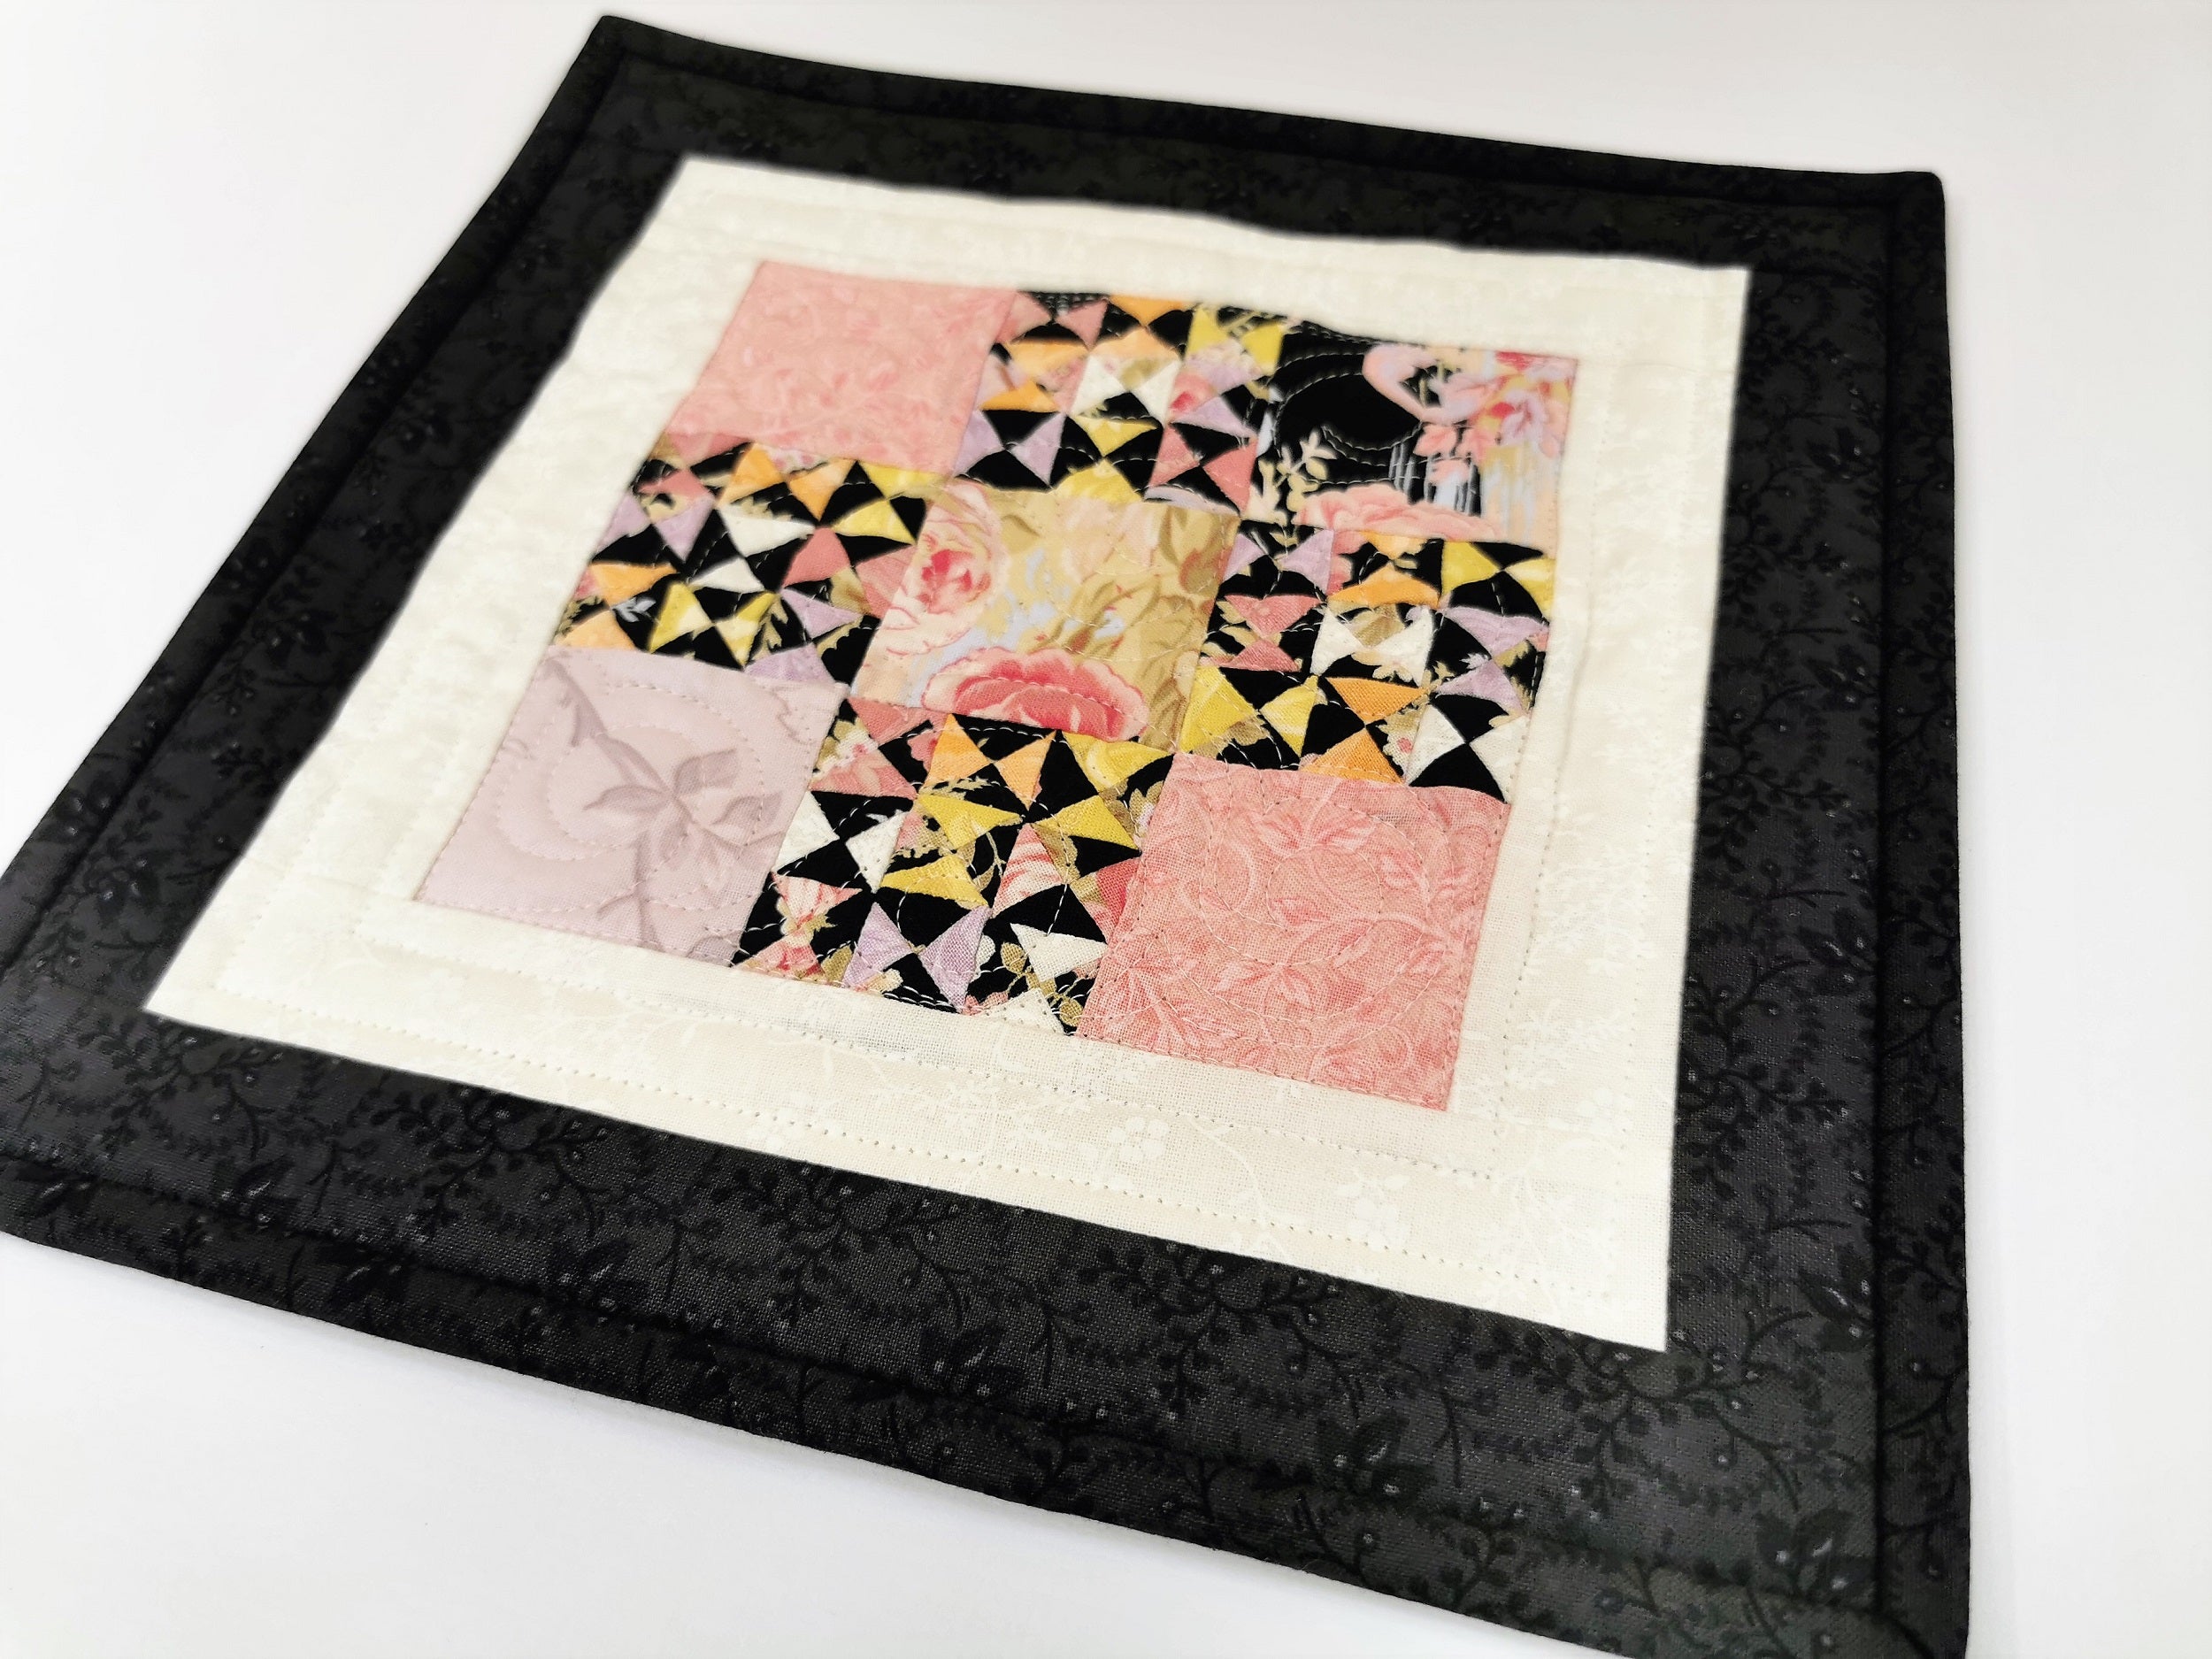 This improv mini scrap quilt features soft pastels paired with dramatic black and white borders. A great little mug rug or candle mat.